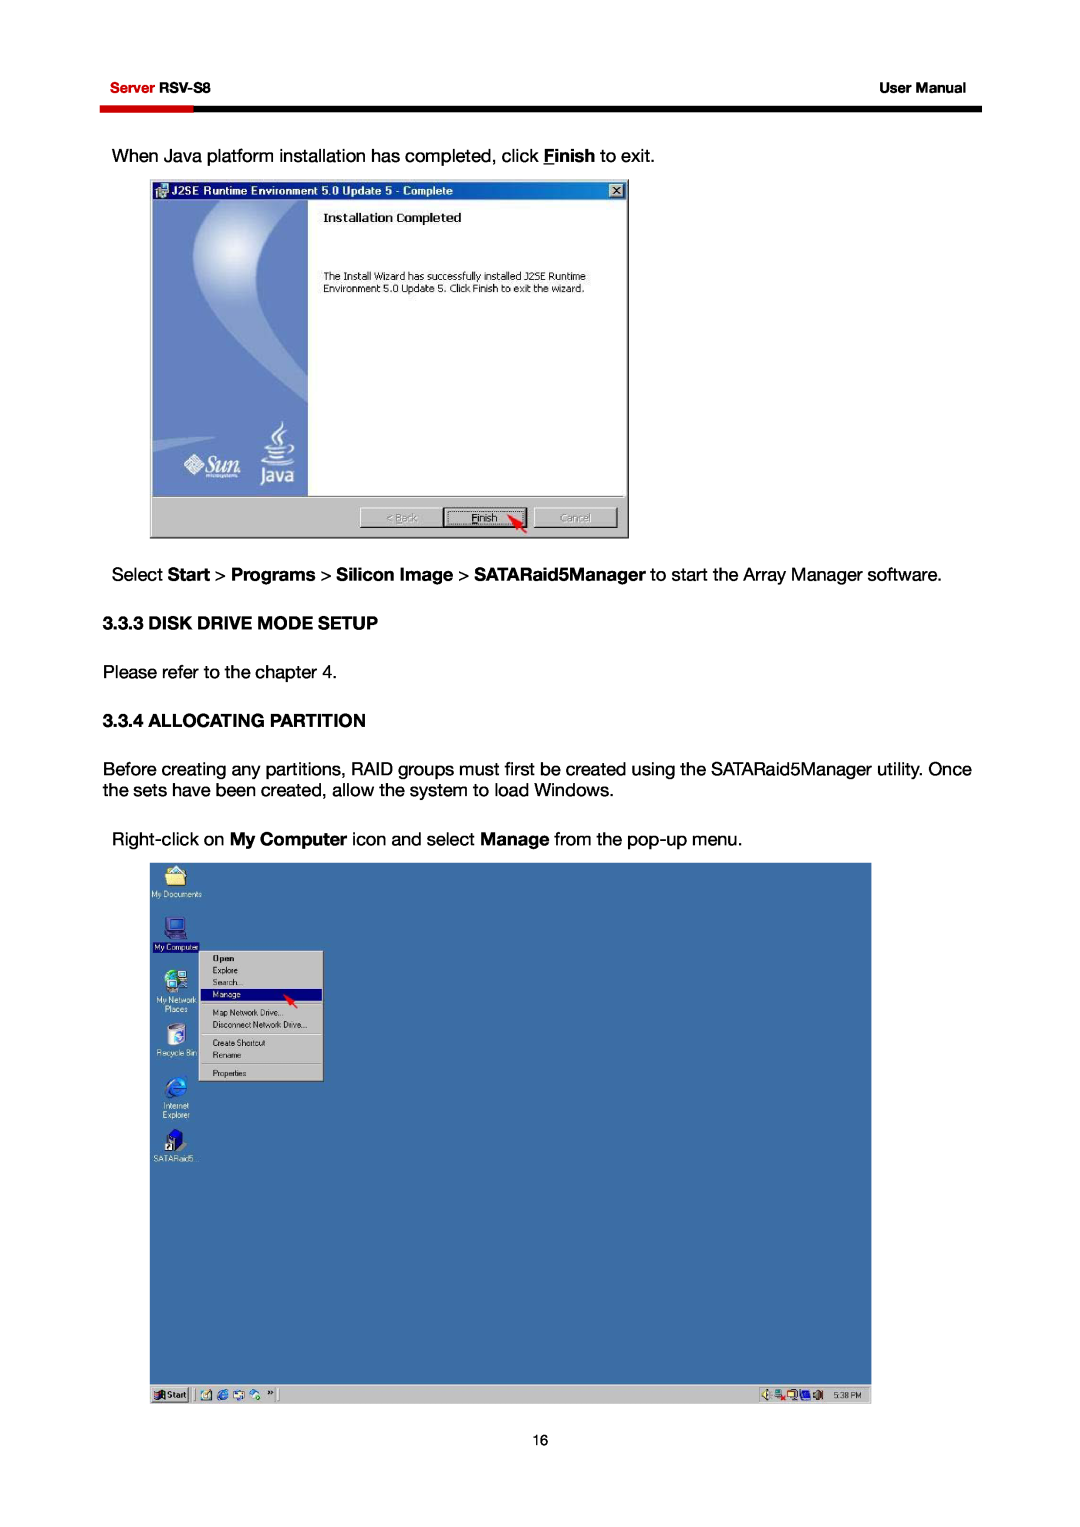 Rosewill RSV-S8 user manual Disk Drive Mode Setup, Allocating Partition 